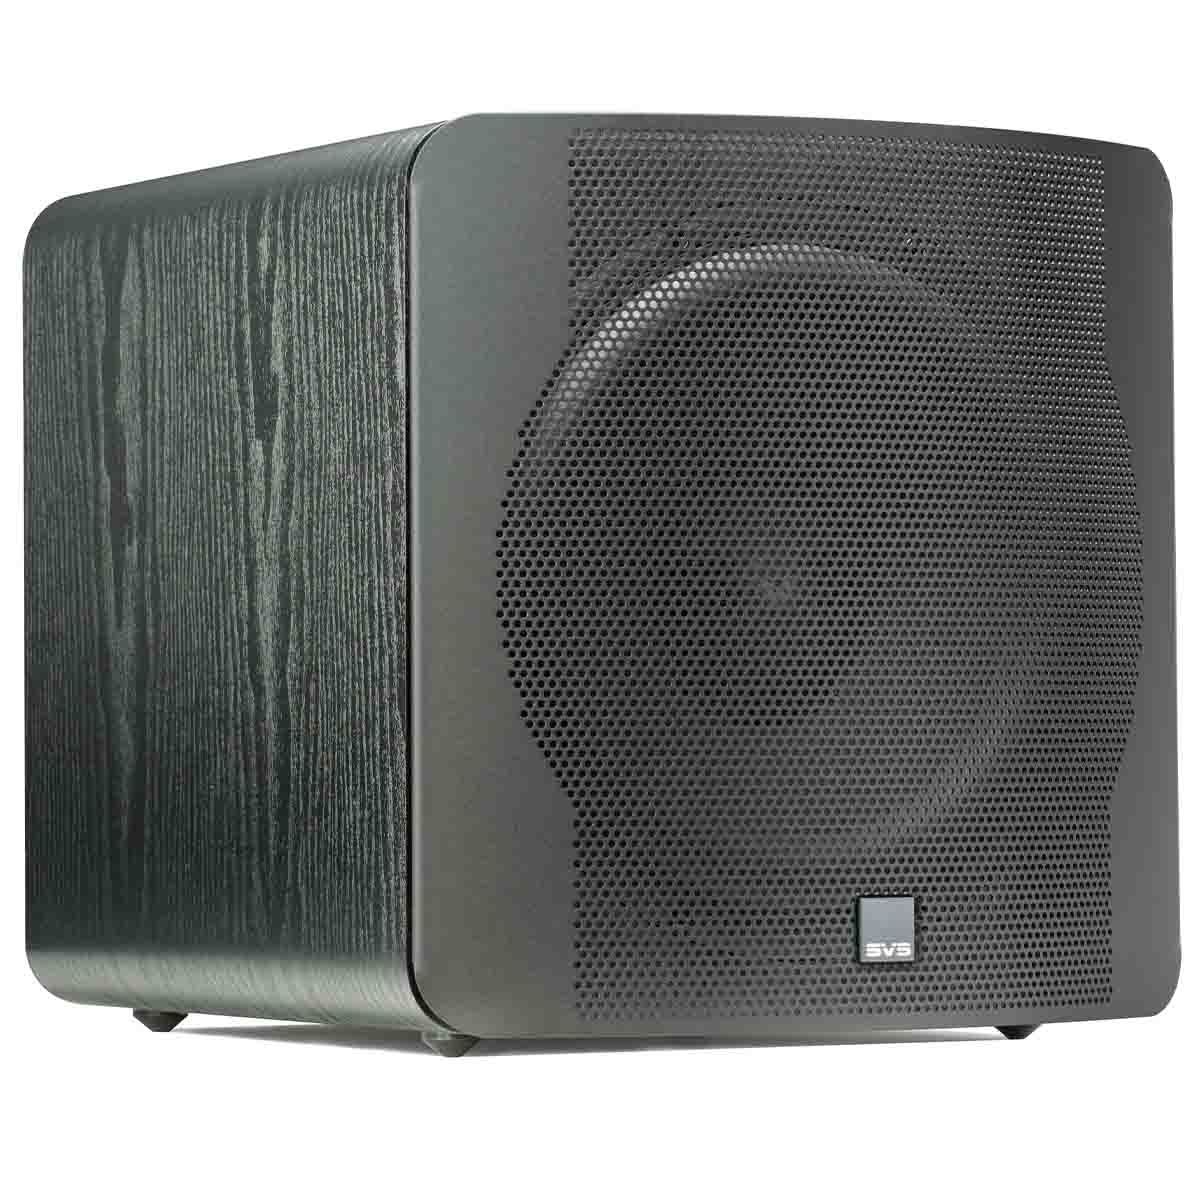 SVS SB-2000 12" Compact Sealed Subwoofer - Premium Black Ash - angled front view with grille